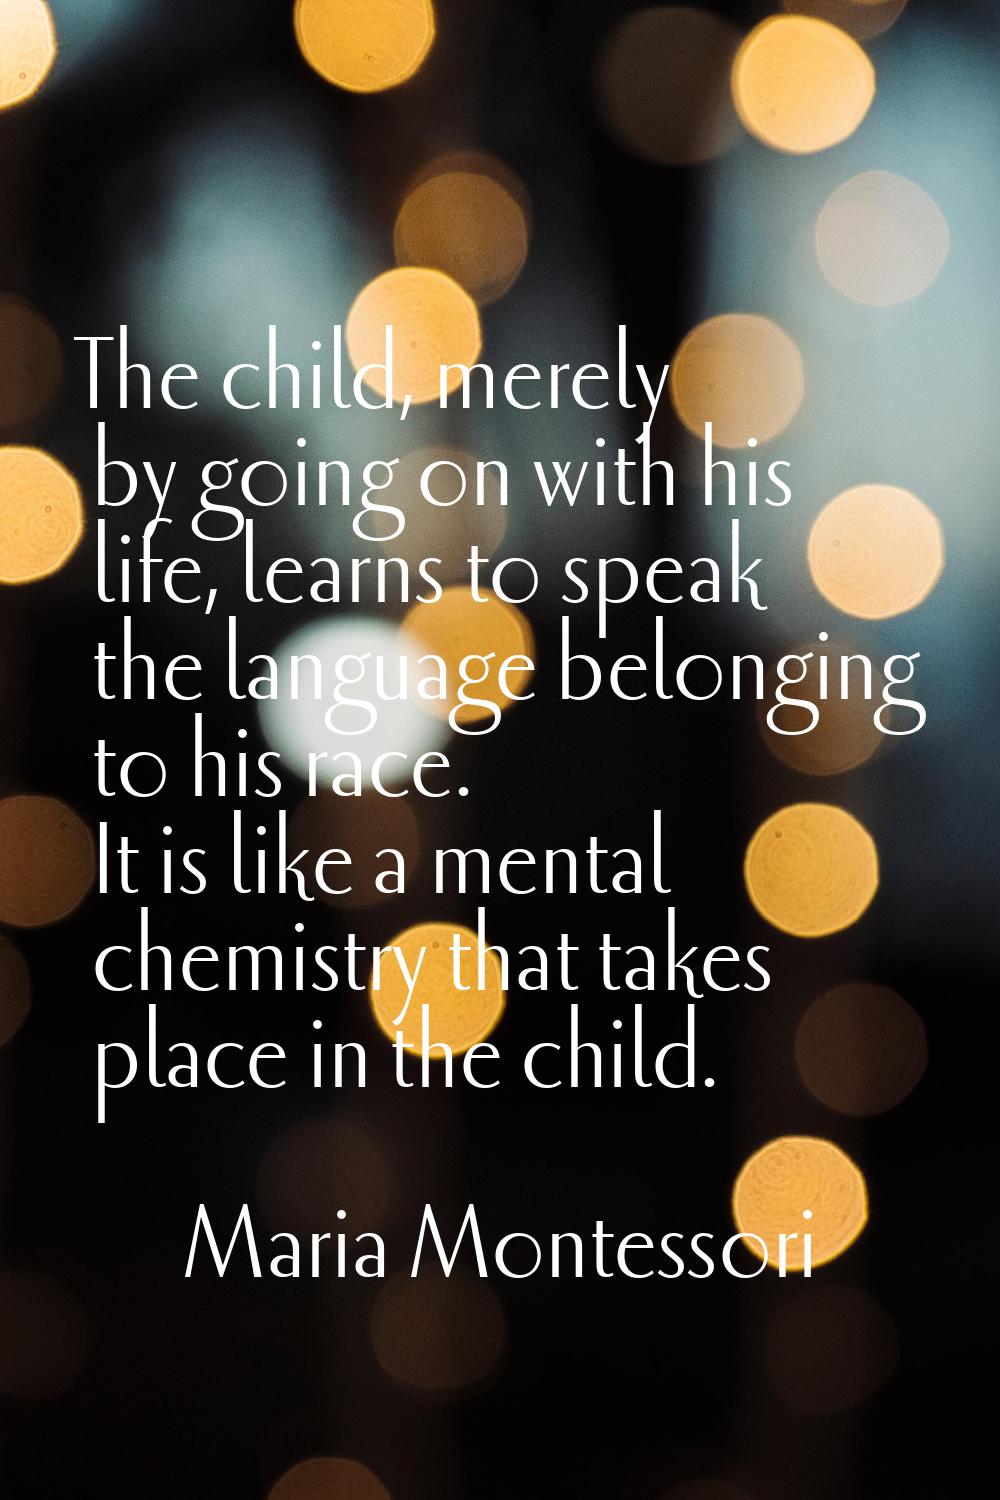 The child, merely by going on with his life, learns to speak the language belonging to his race. It